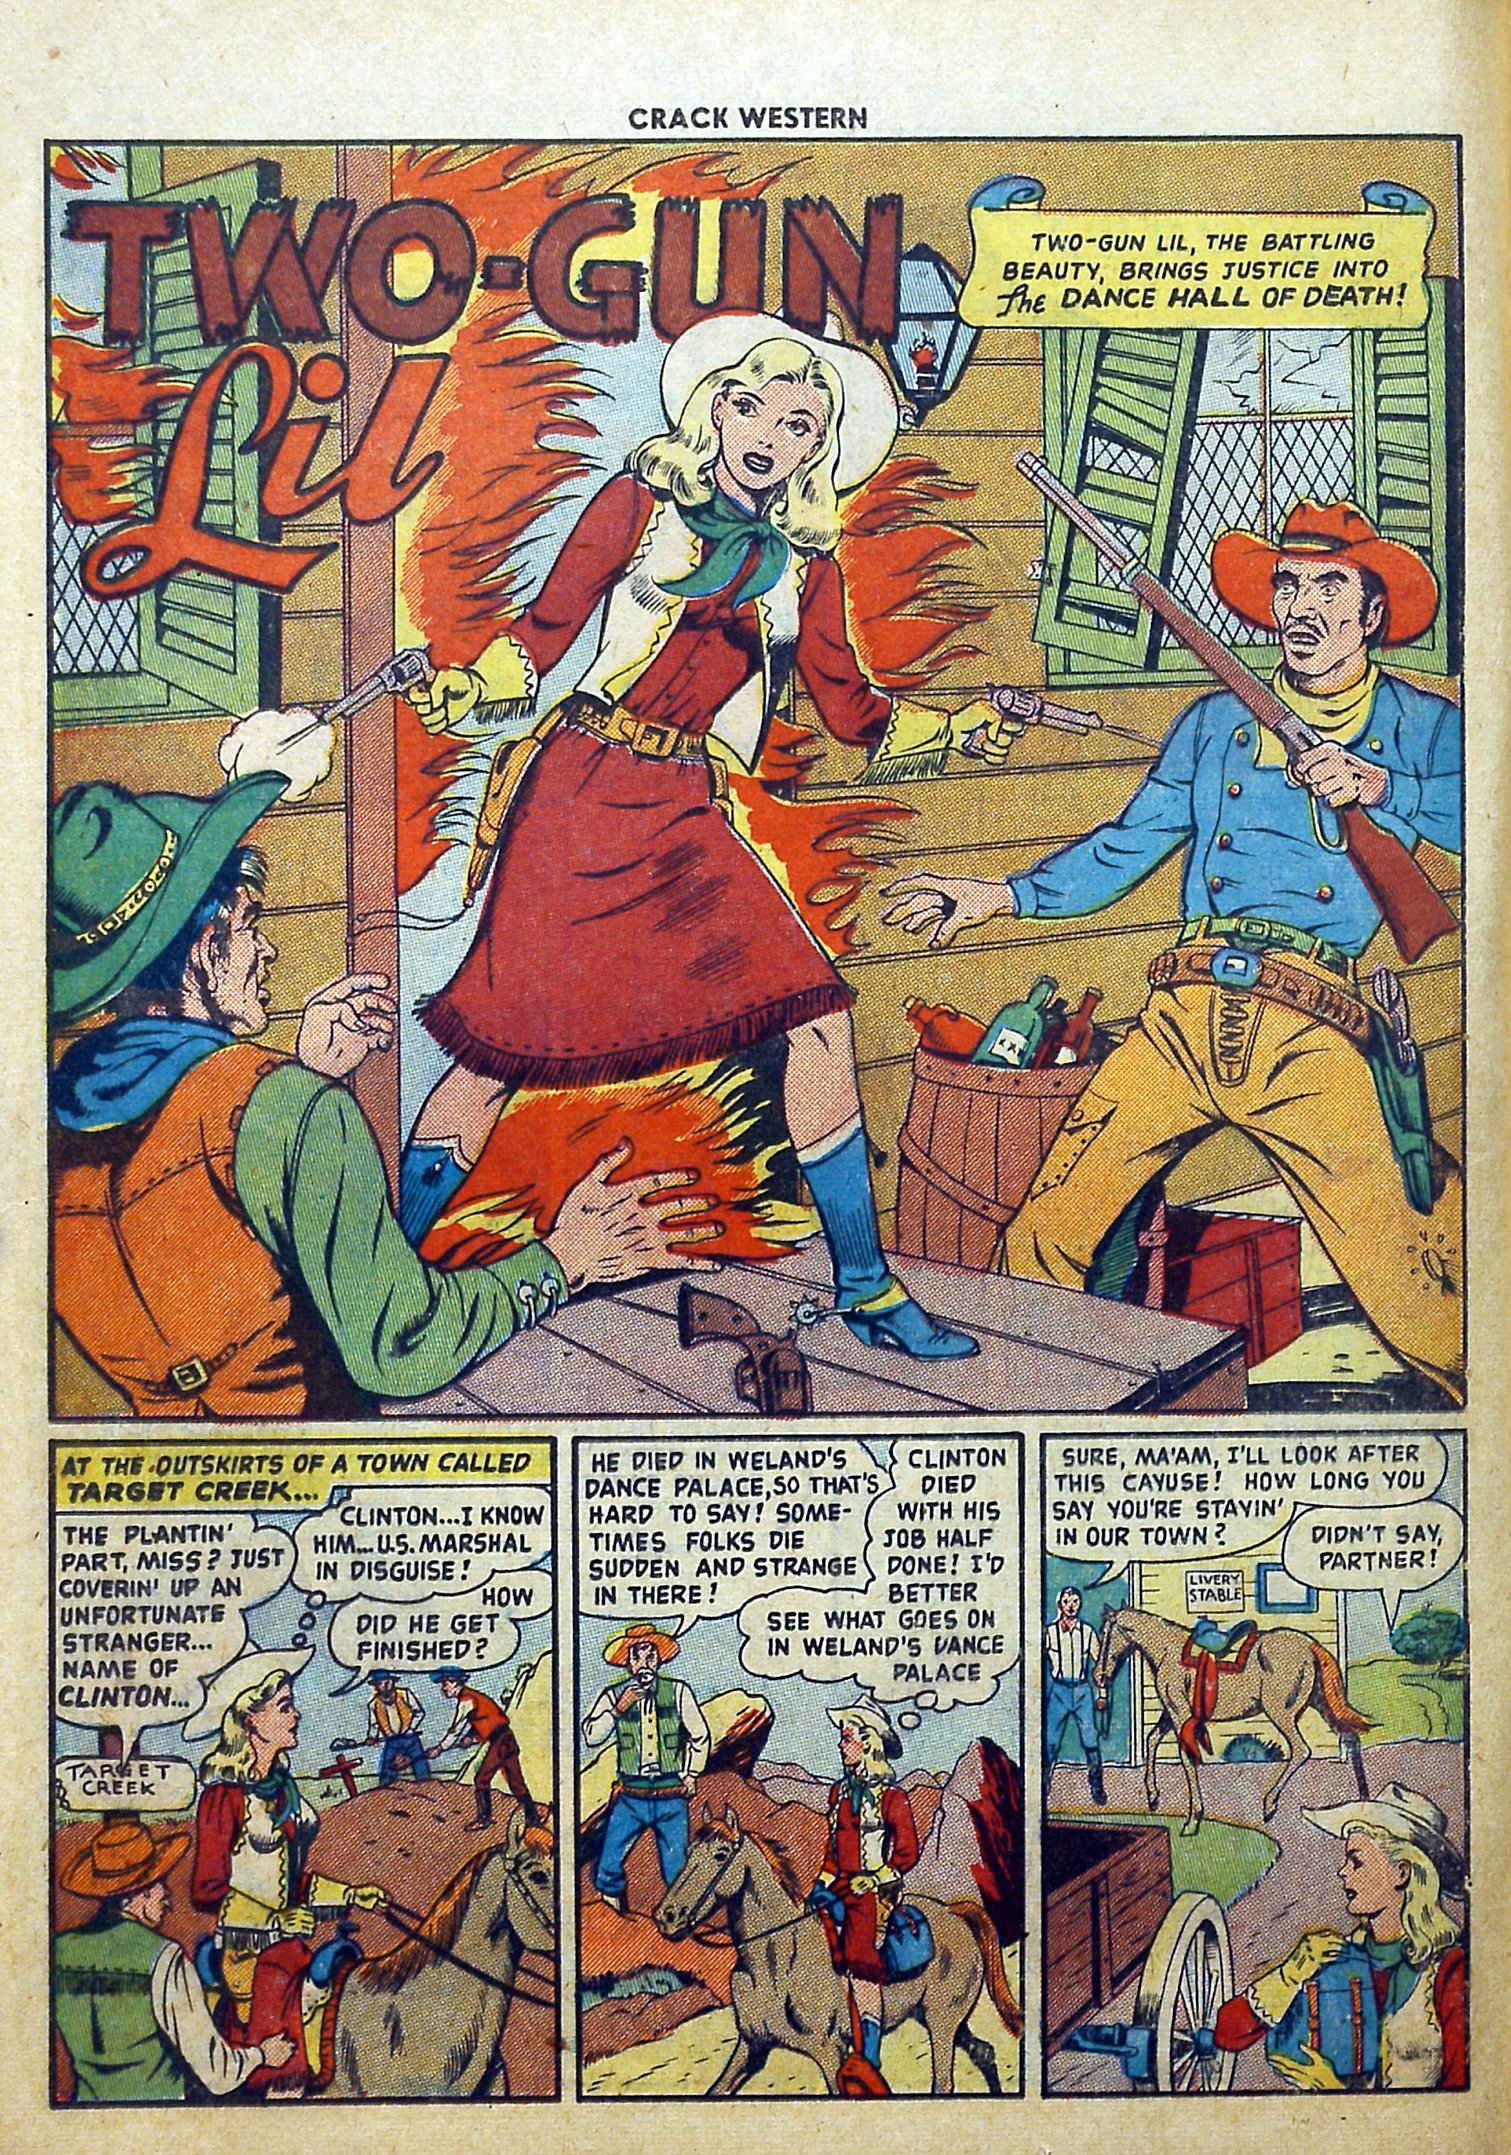 Read online Crack Western comic -  Issue #65 - 12